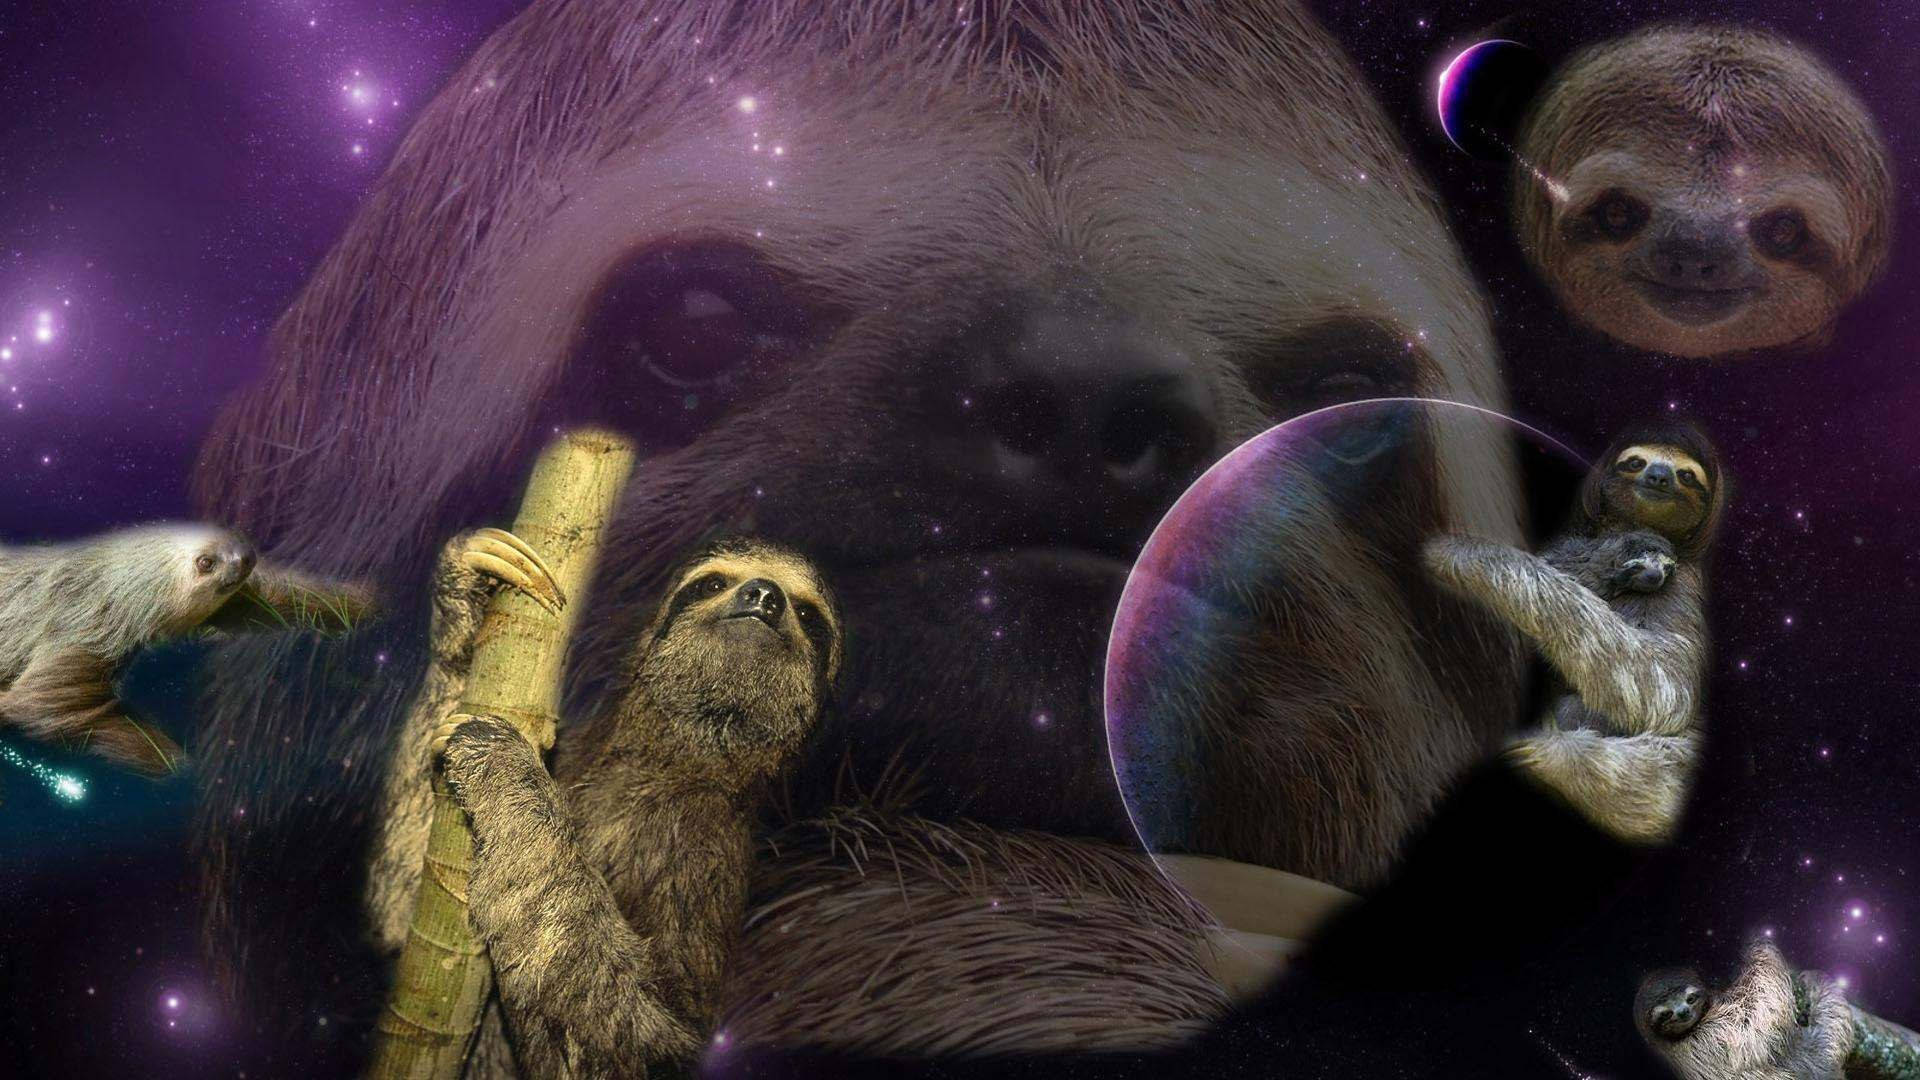 Weird Sloth In The Universe Background